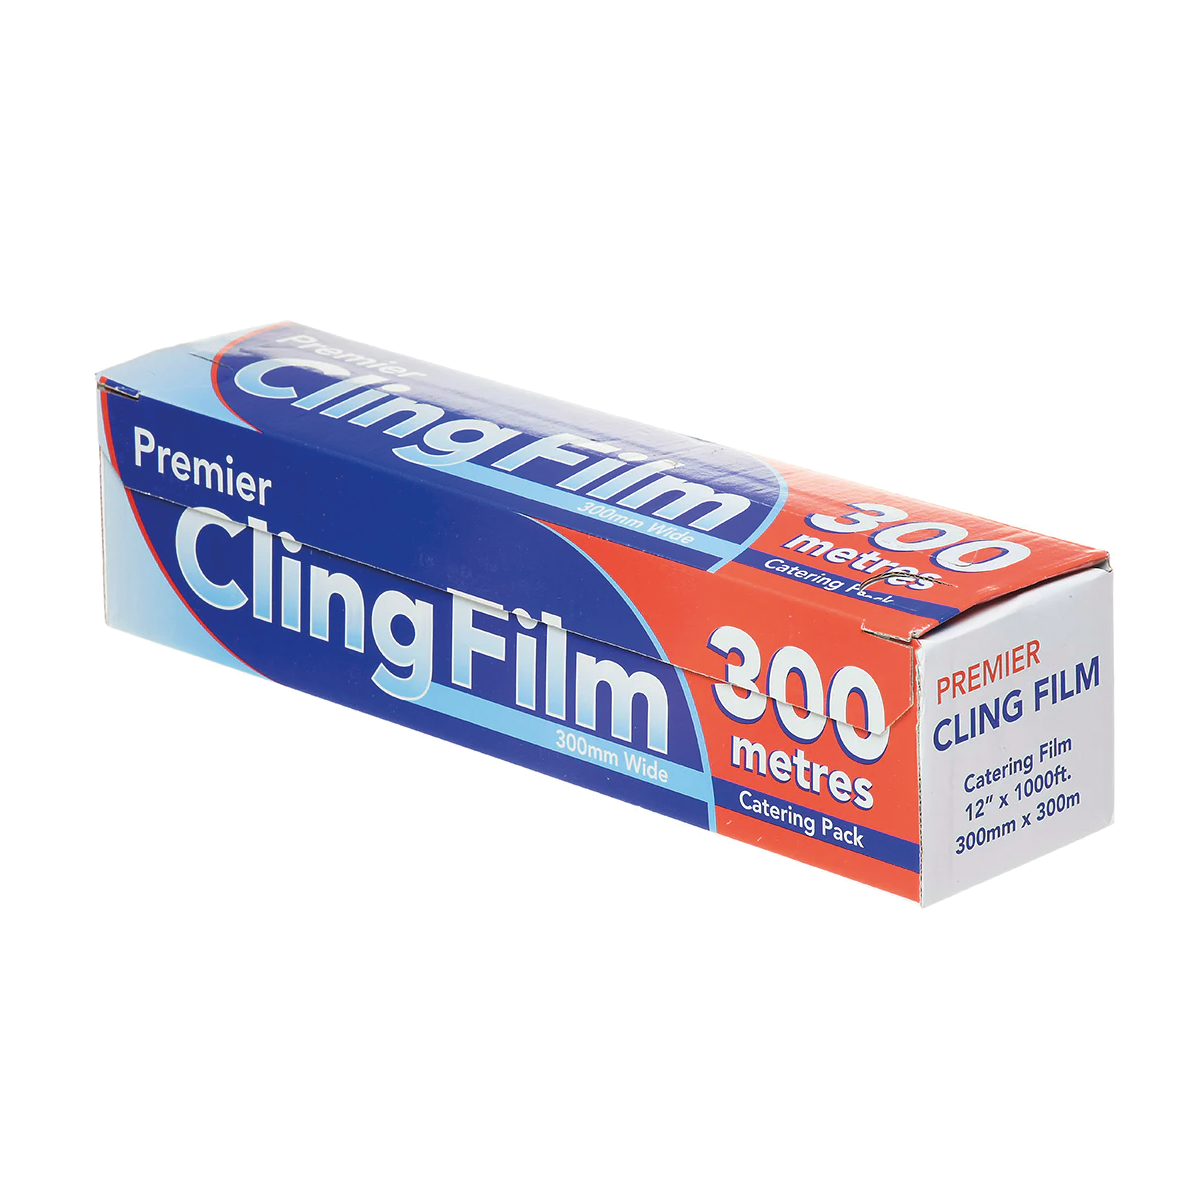 Small Cling Film 300m